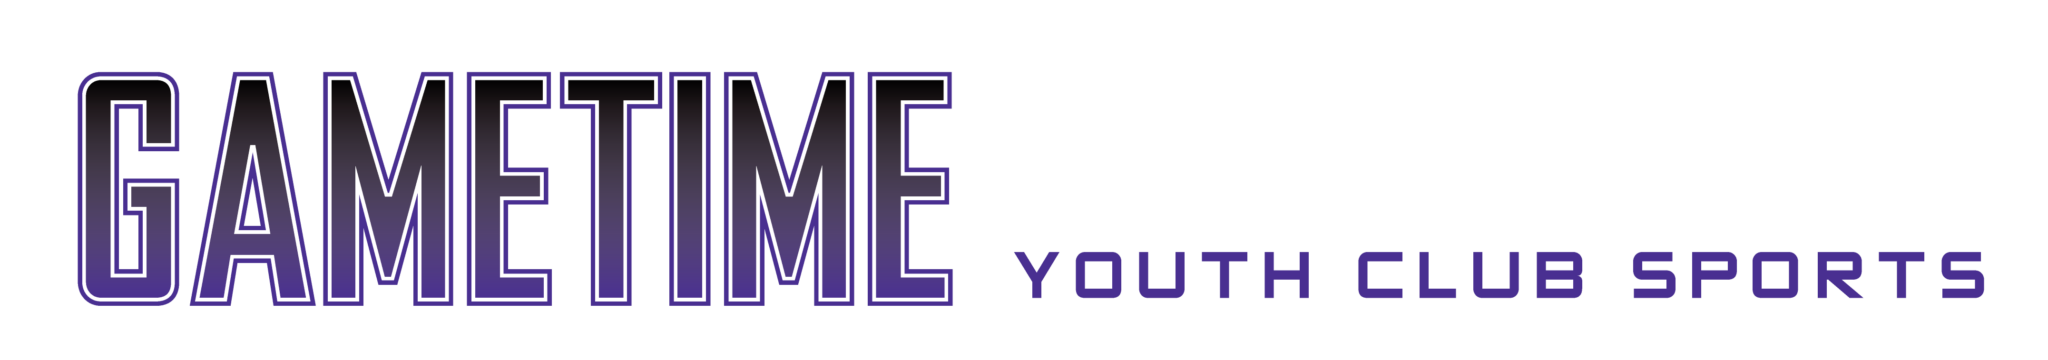 GameTime-Academy-Banner_png